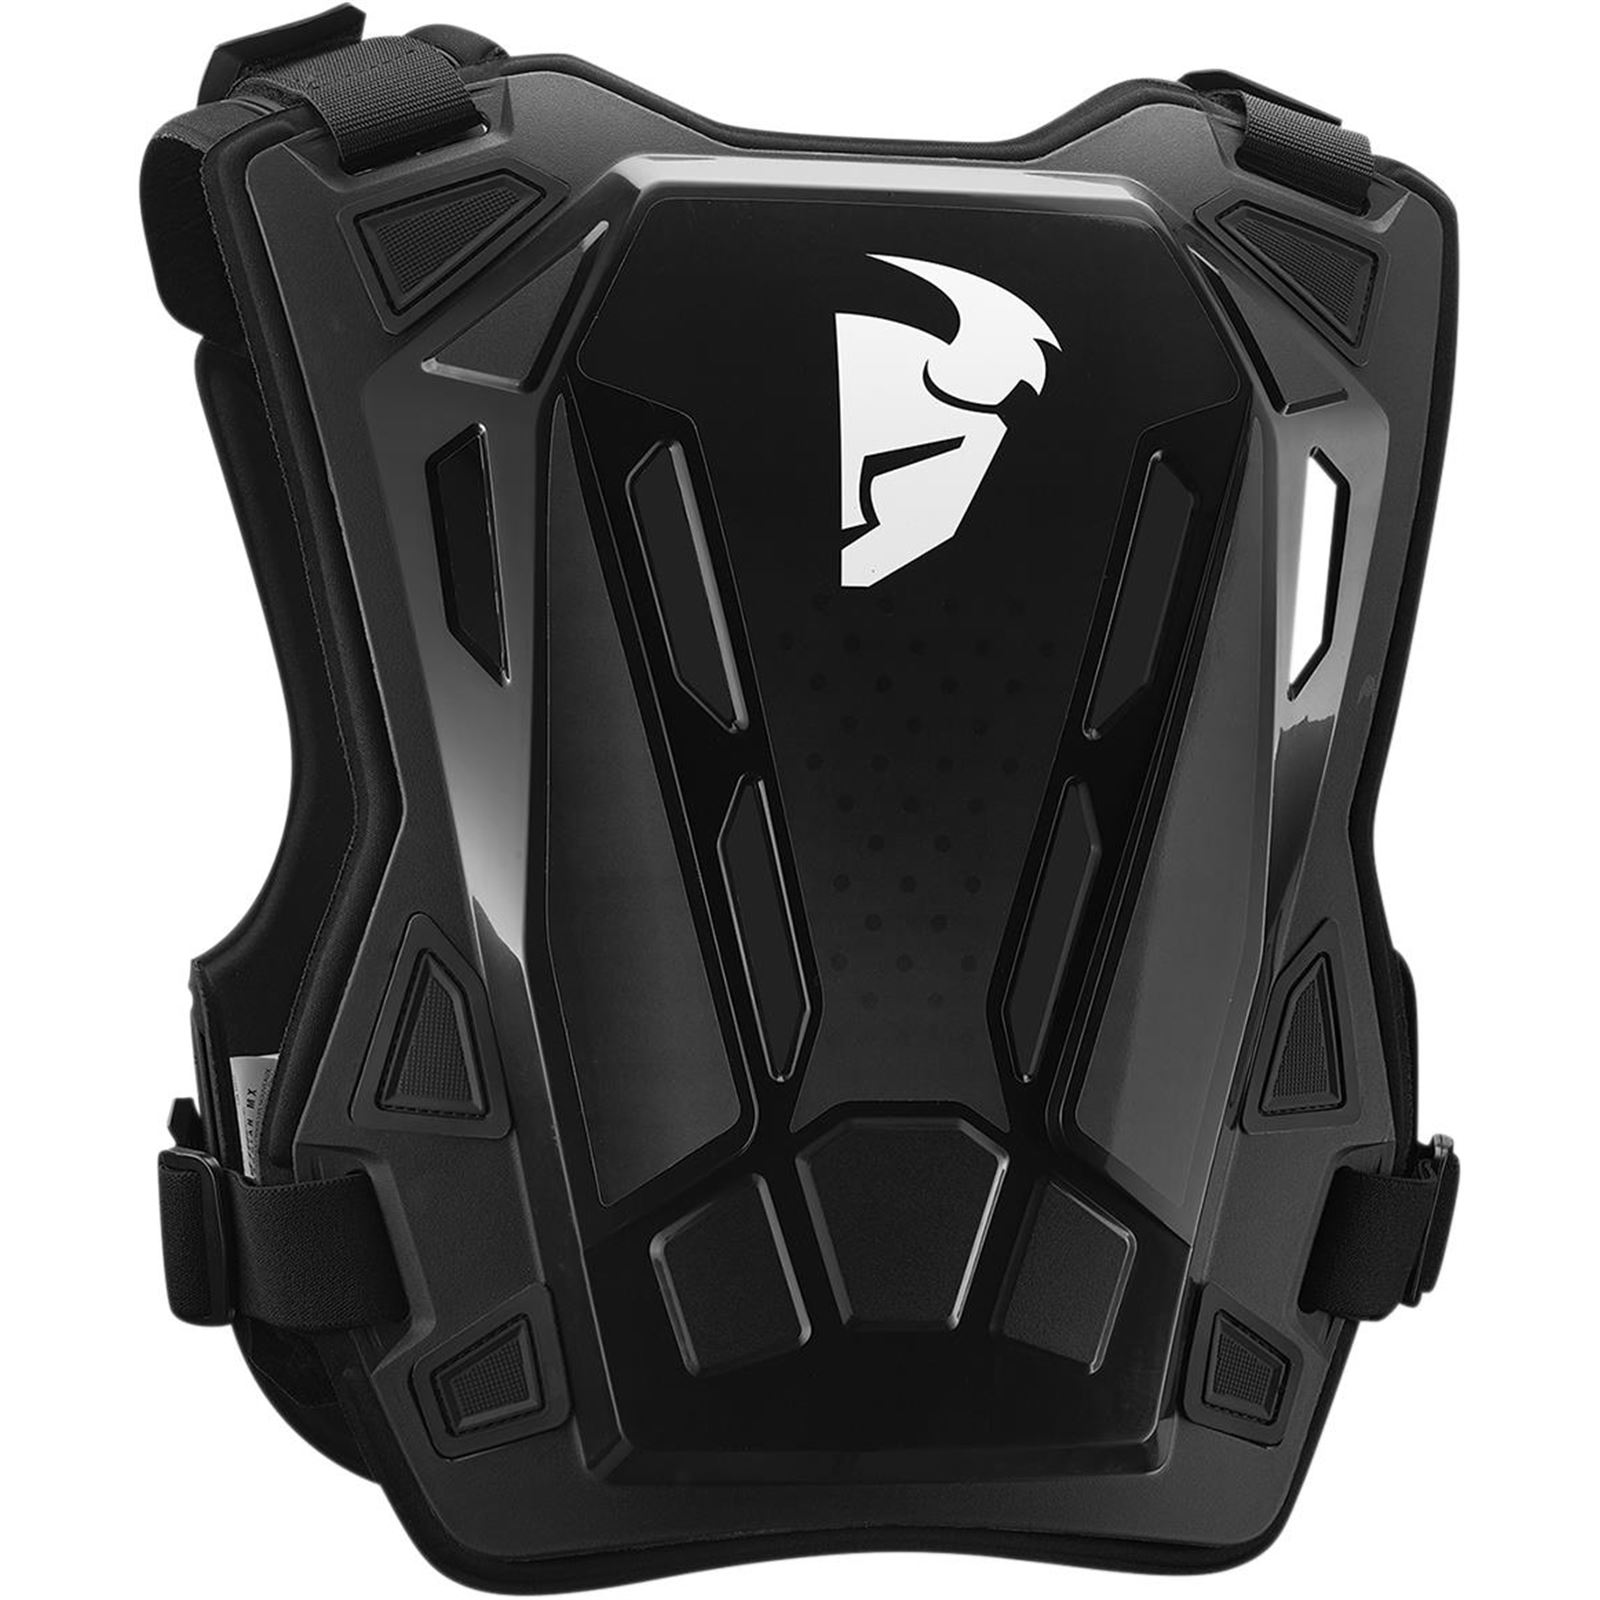 Thor Youth Guardian MX Roost Guard - Black  - 2X-Small/X-Small